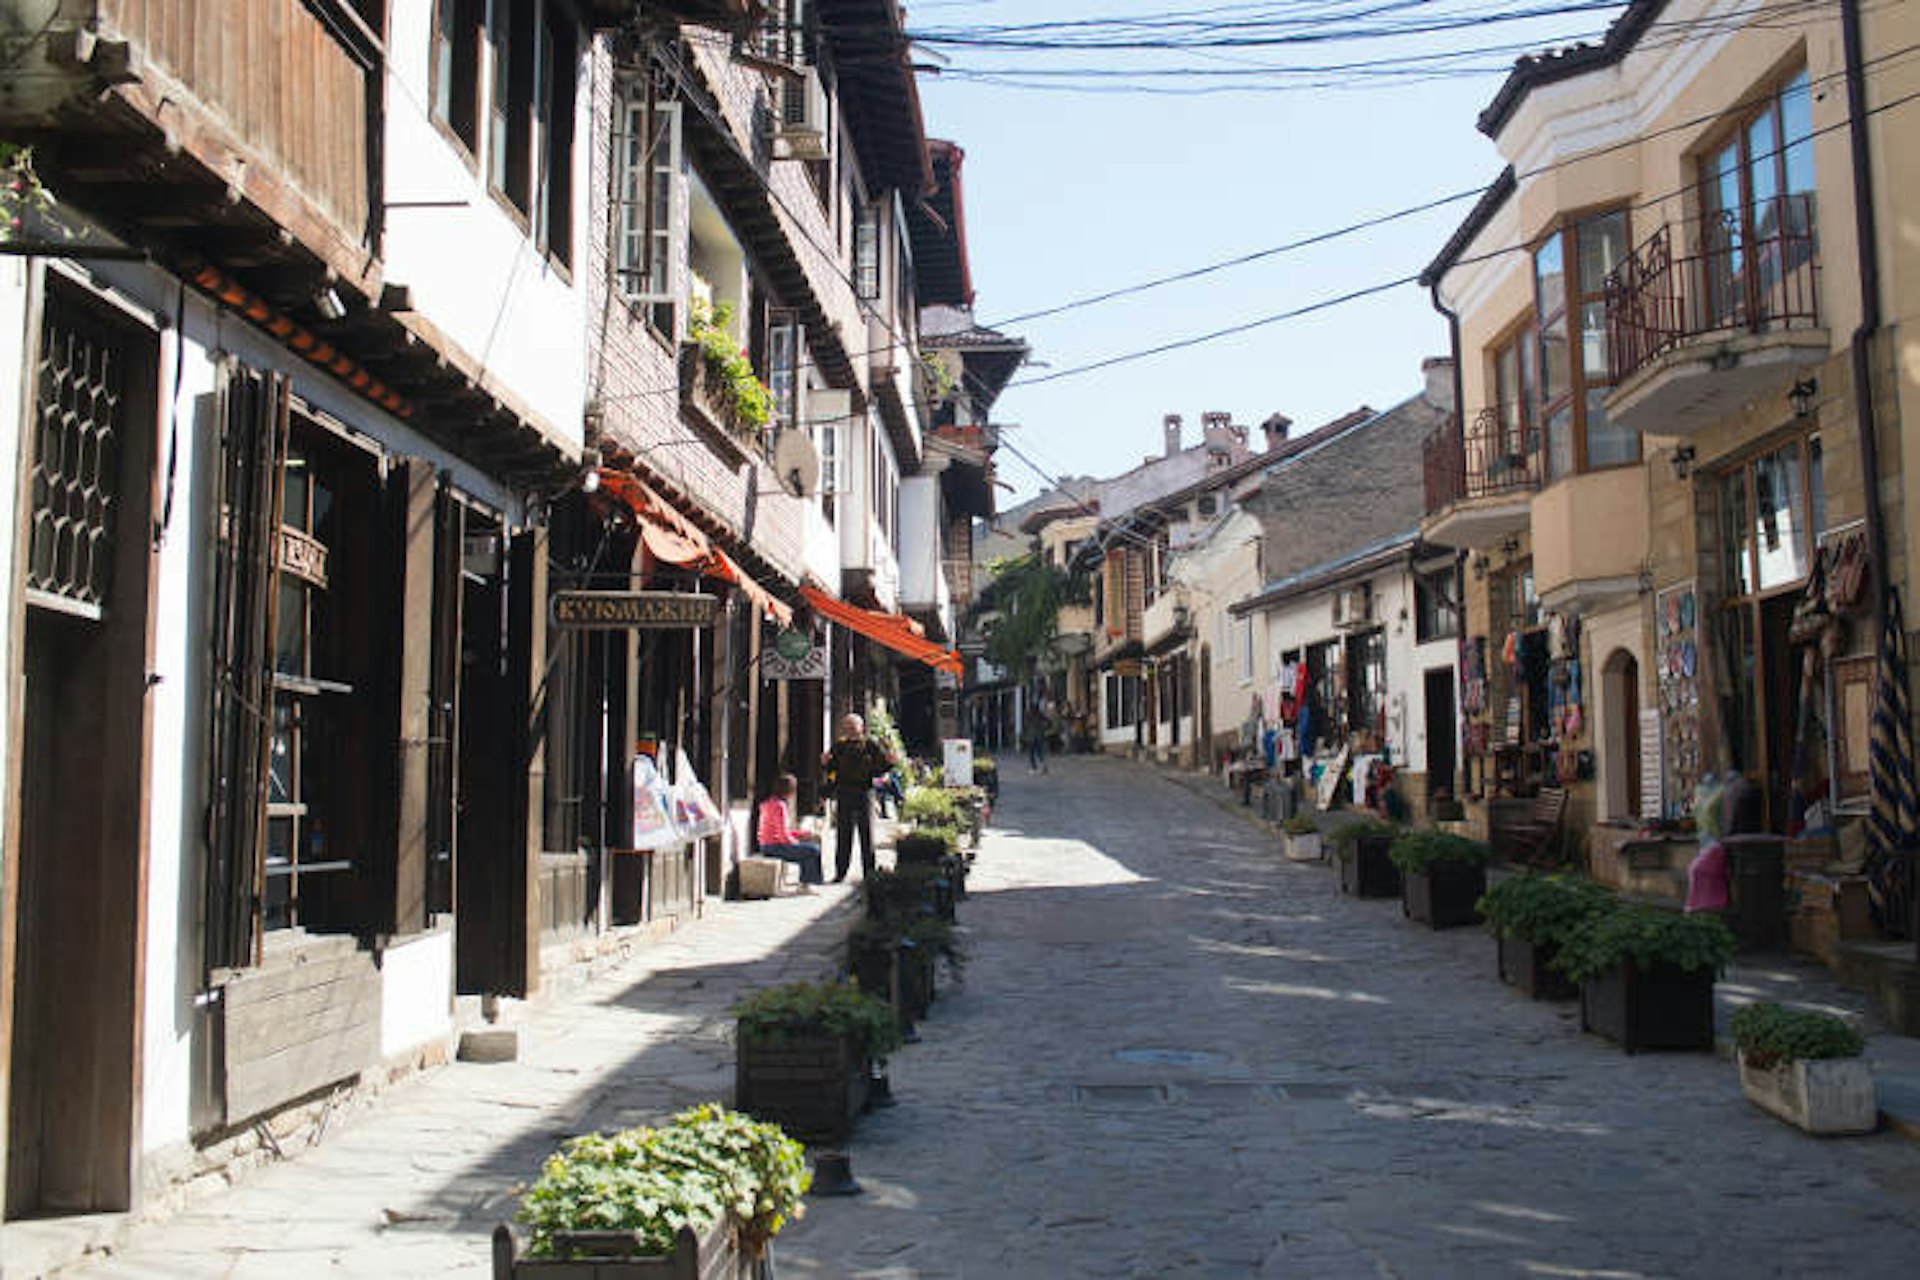 The ‘street of arts’ in Veliko Tarnovo. Image by Andrey / CC BY 2.0